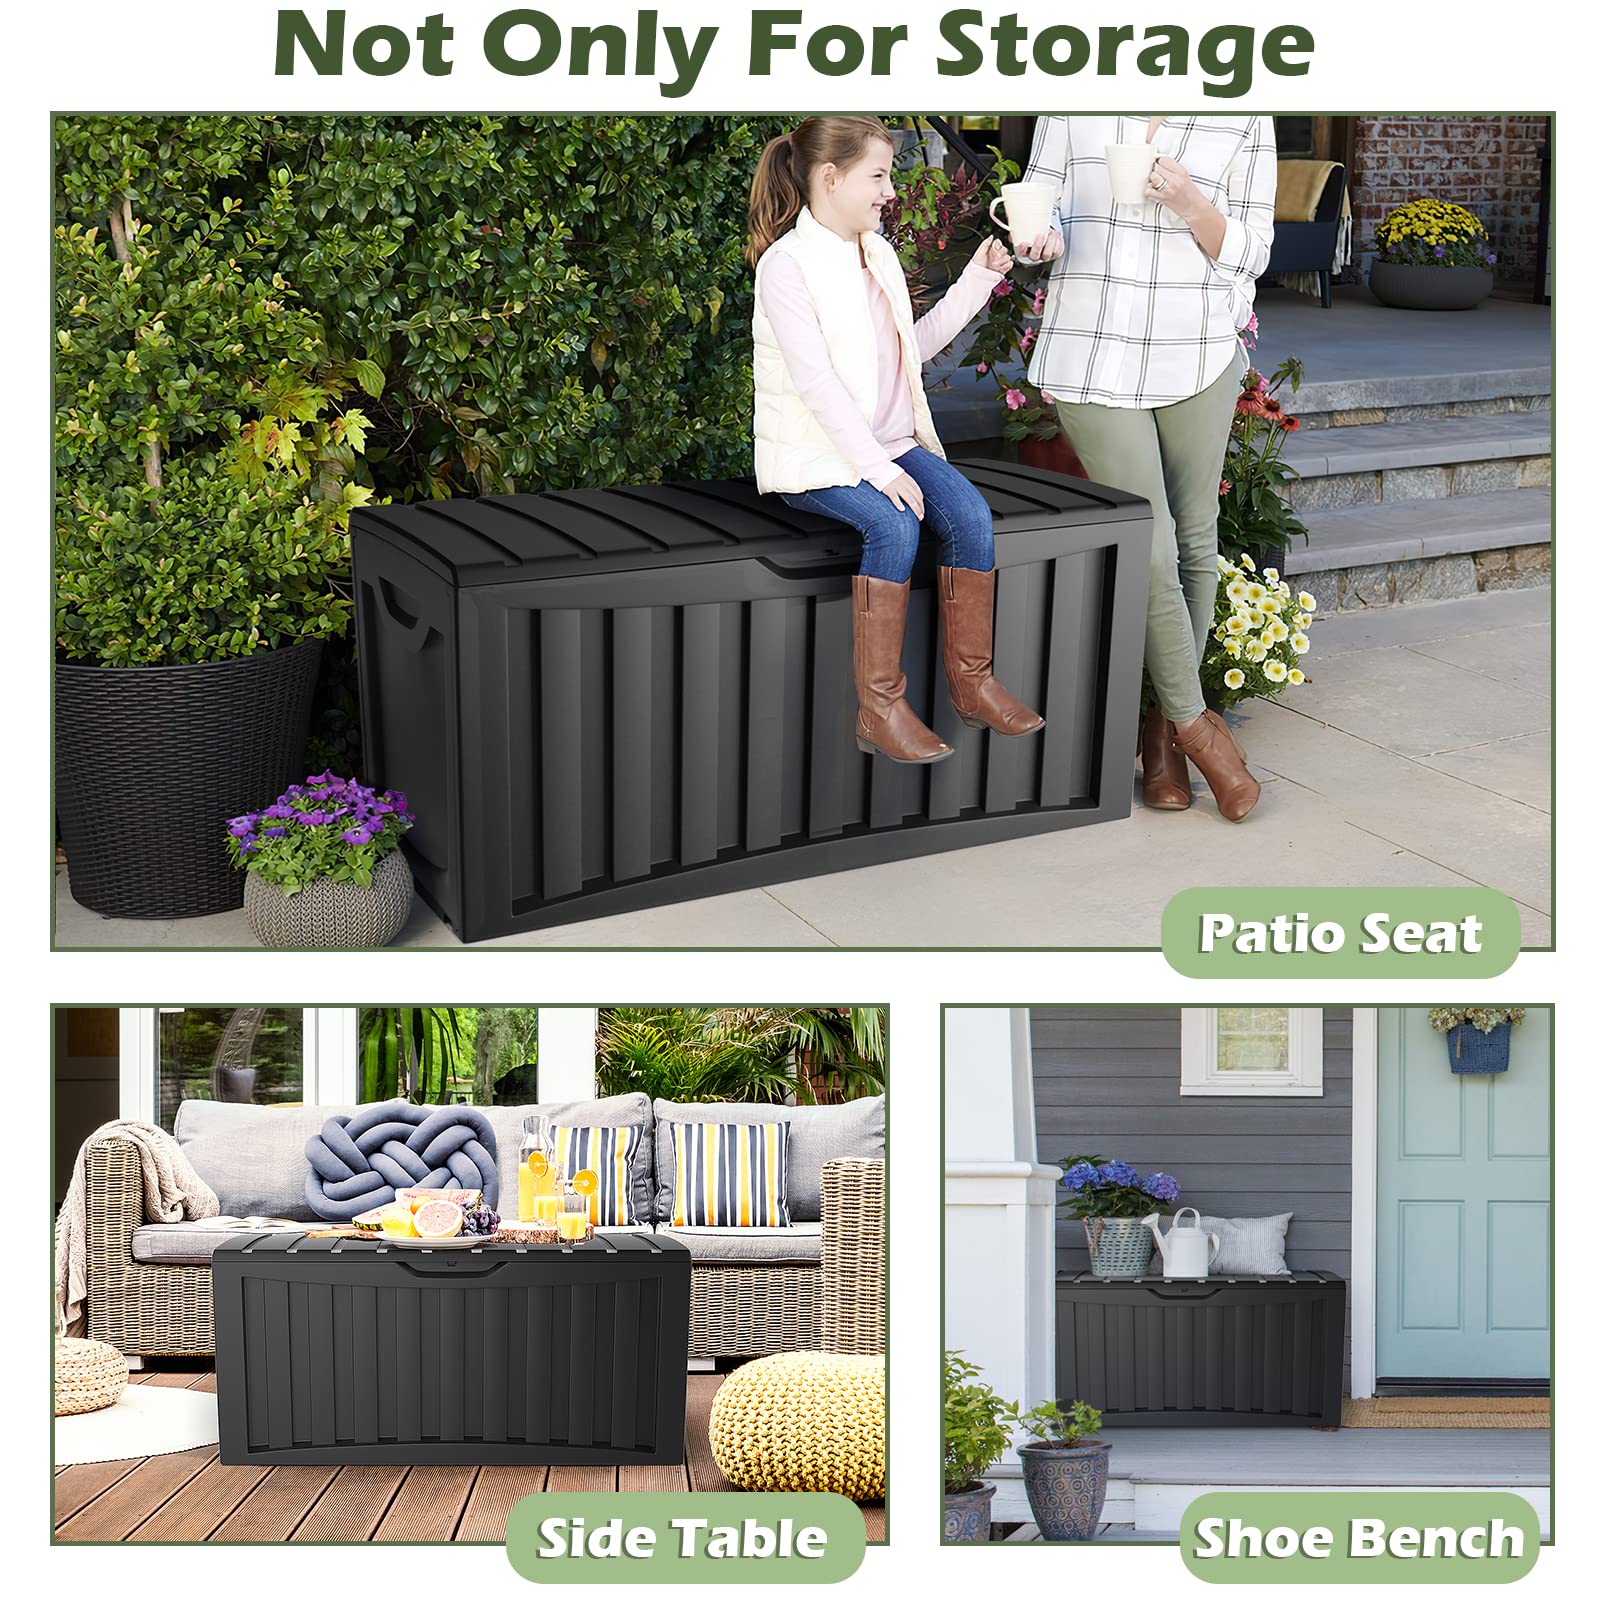 Giantex 90-Gallon Outdoor Storage Box - Outside Storage Box with Built-in Rollers & Recessed Handles, Black